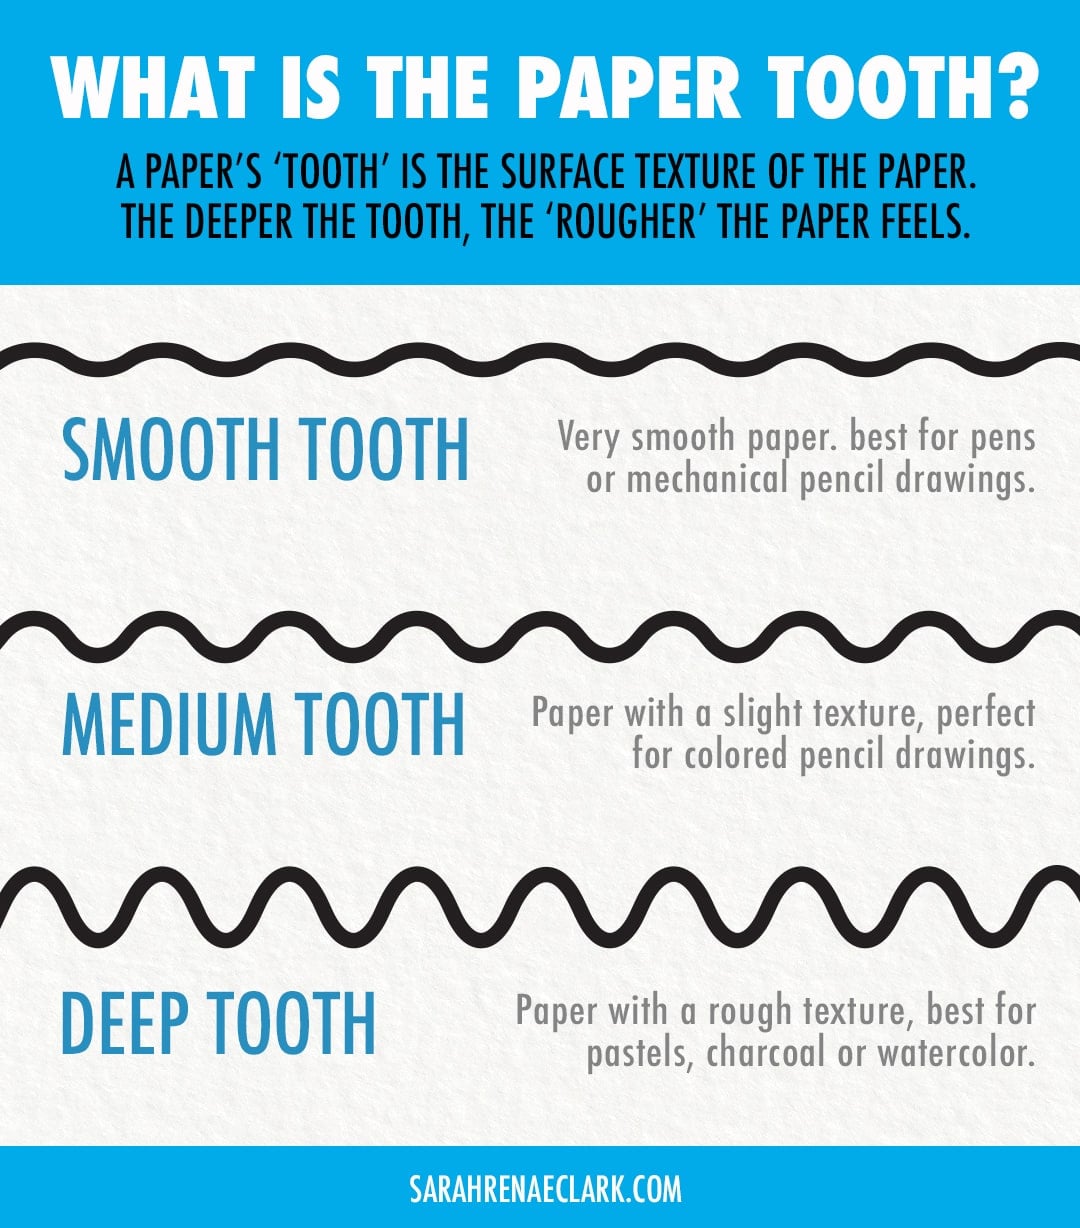 Difference between paper texture - smooth paper tooth to deep paper tooth